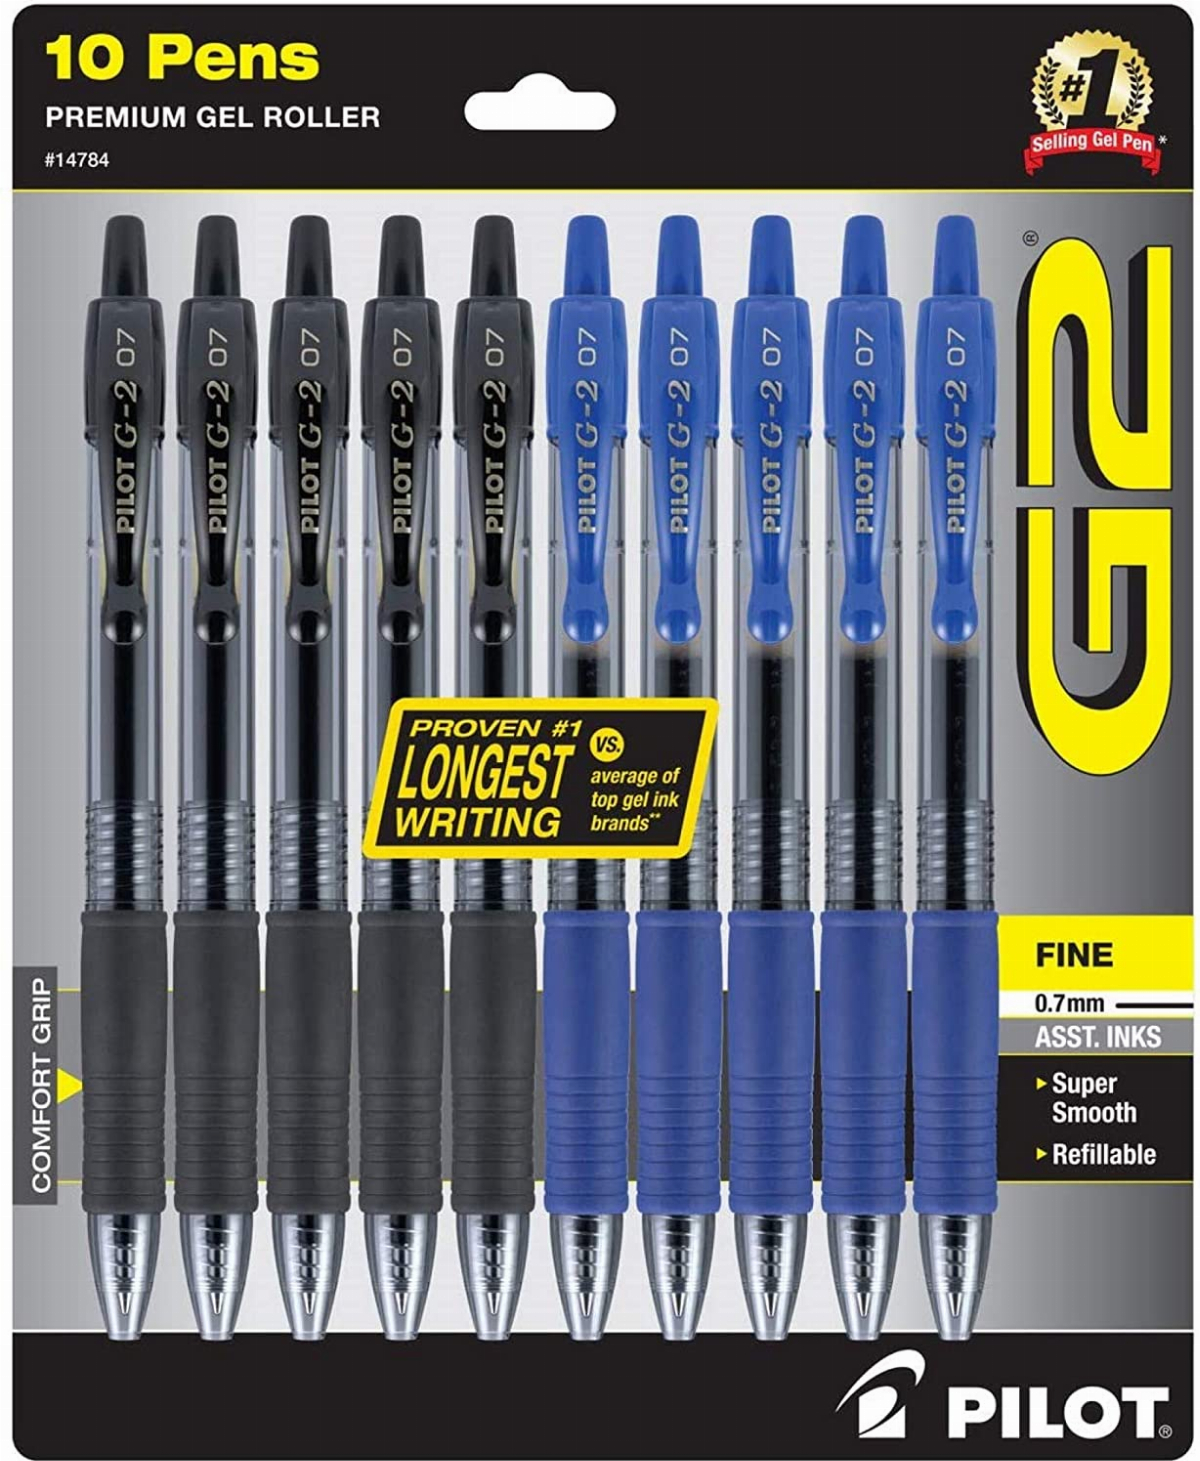 5-Pack G2 Premium Refillable & Retractable Rolling Ball Gel Pens Black Ink Extra Fine Point 5-Pack Black 31173 2 Pack 